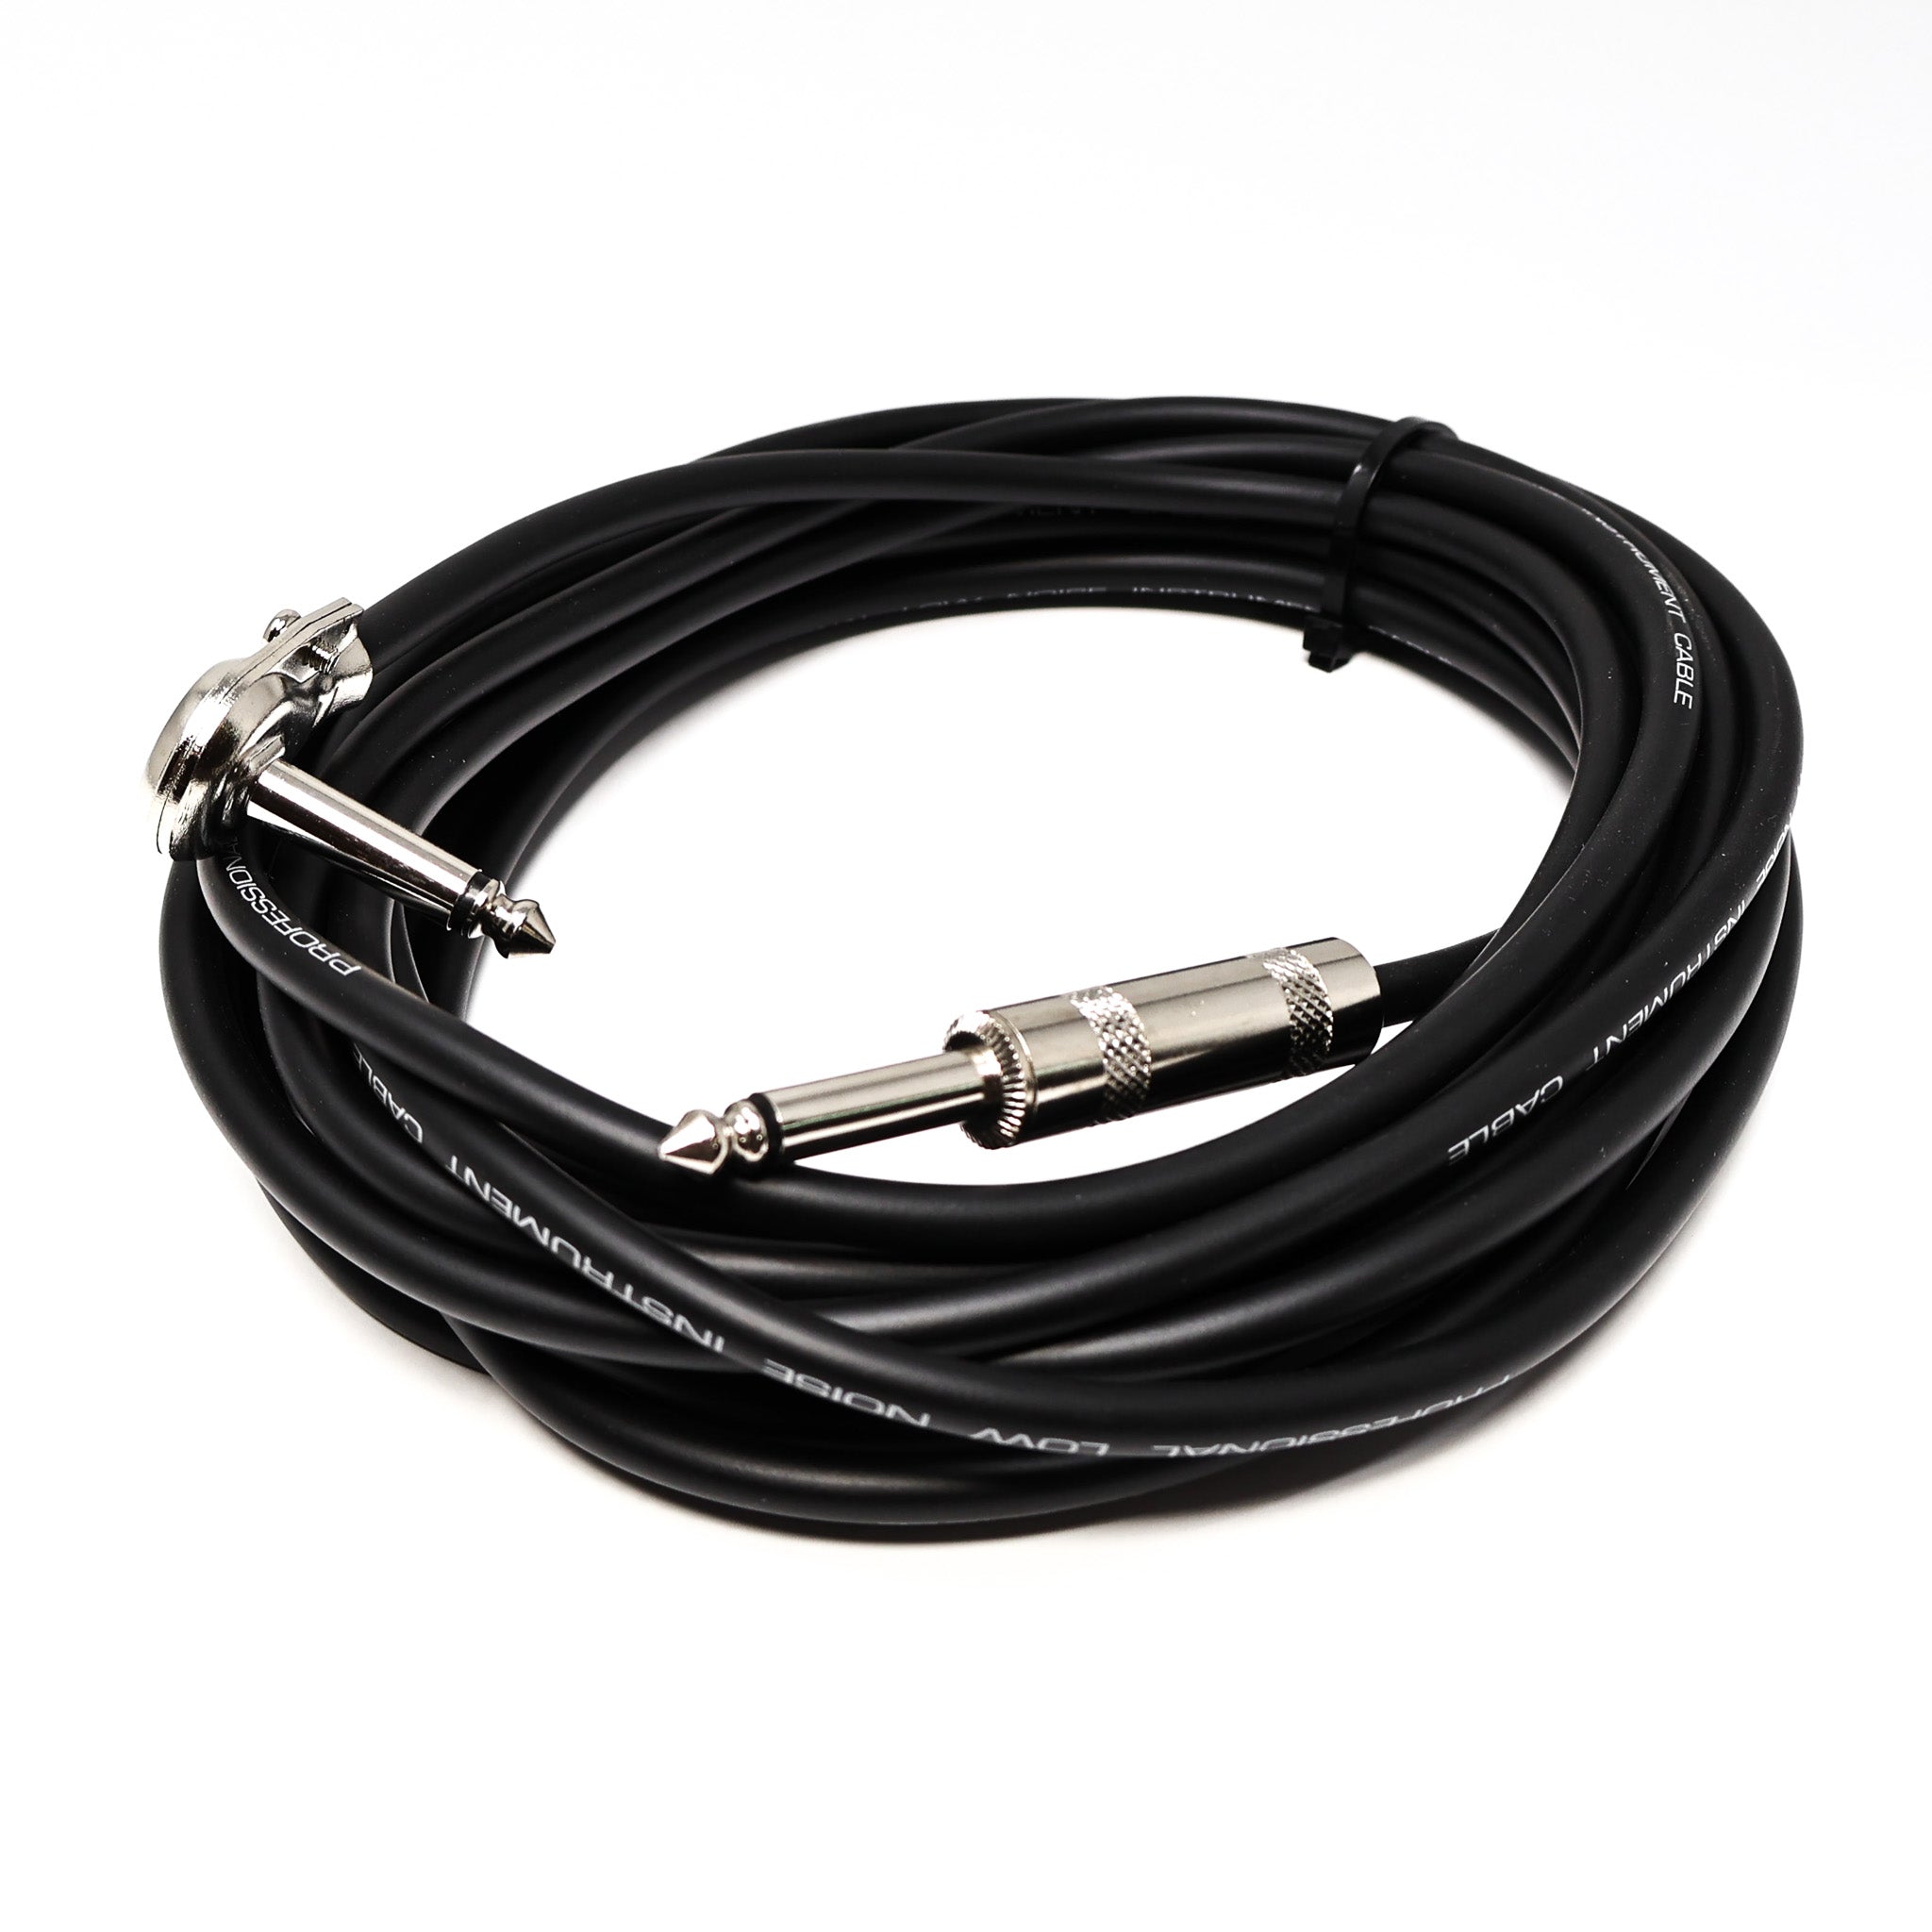 Professional Instrument Cable W/ Two Male Jacks, One Of Which Is A Right Angle Connector Allowing For Flush Fitment On Your Instrument - 20ft